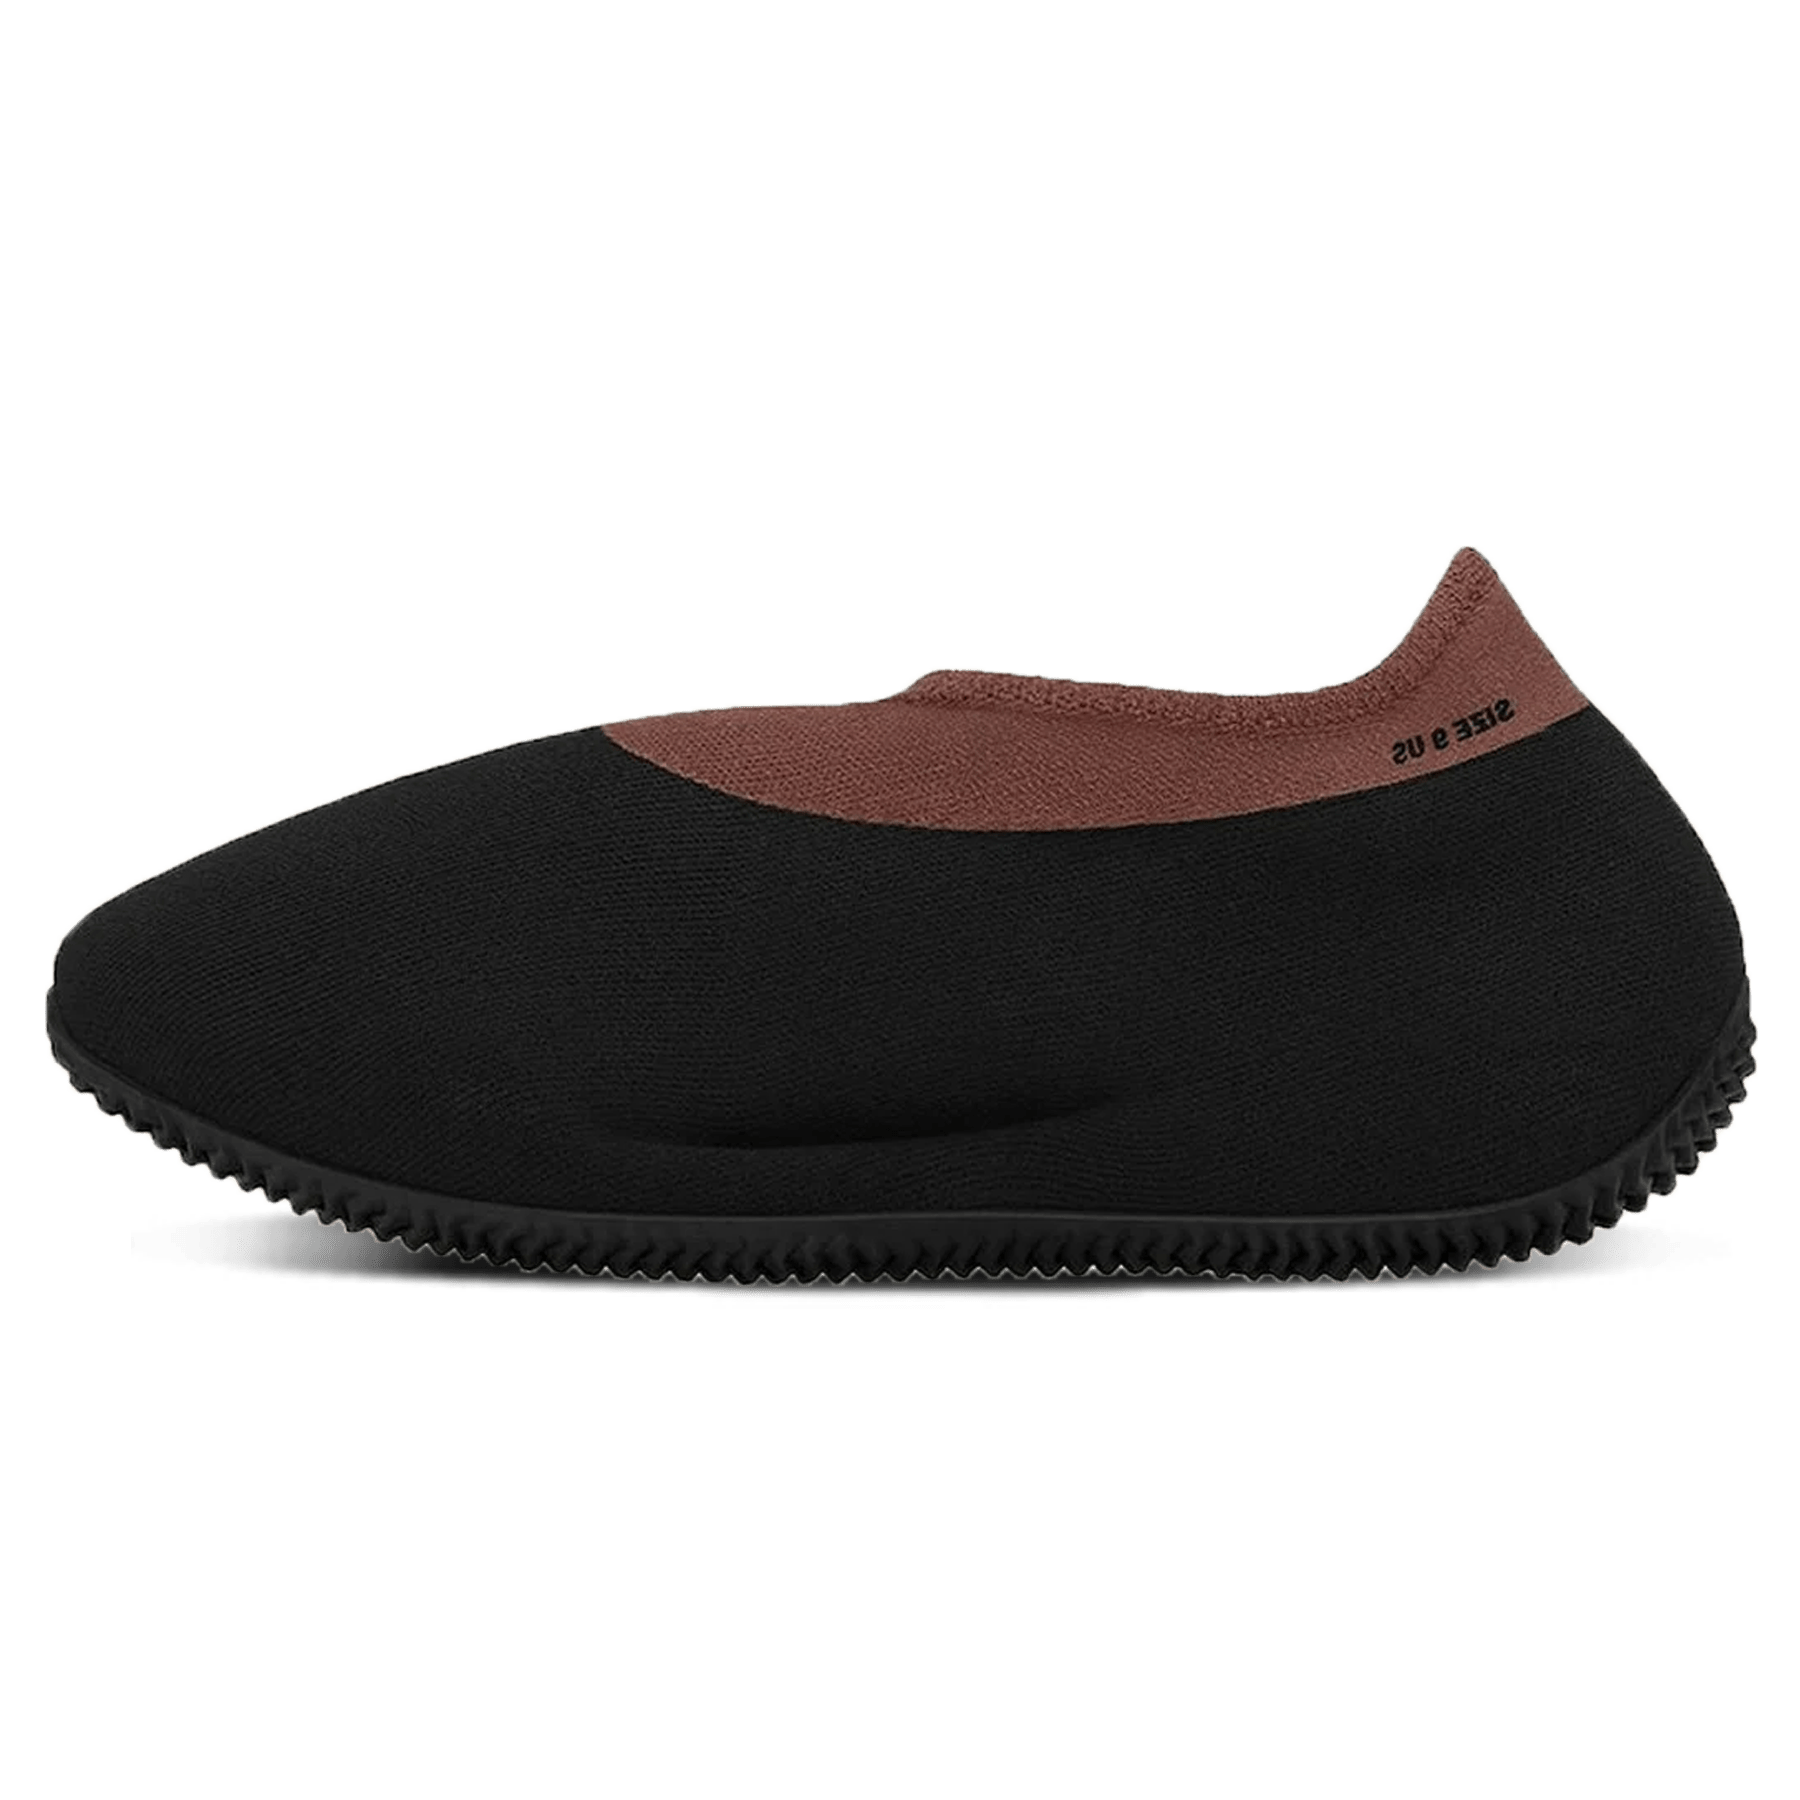 Yeezy Knit Runner Stone Carbon GY1759